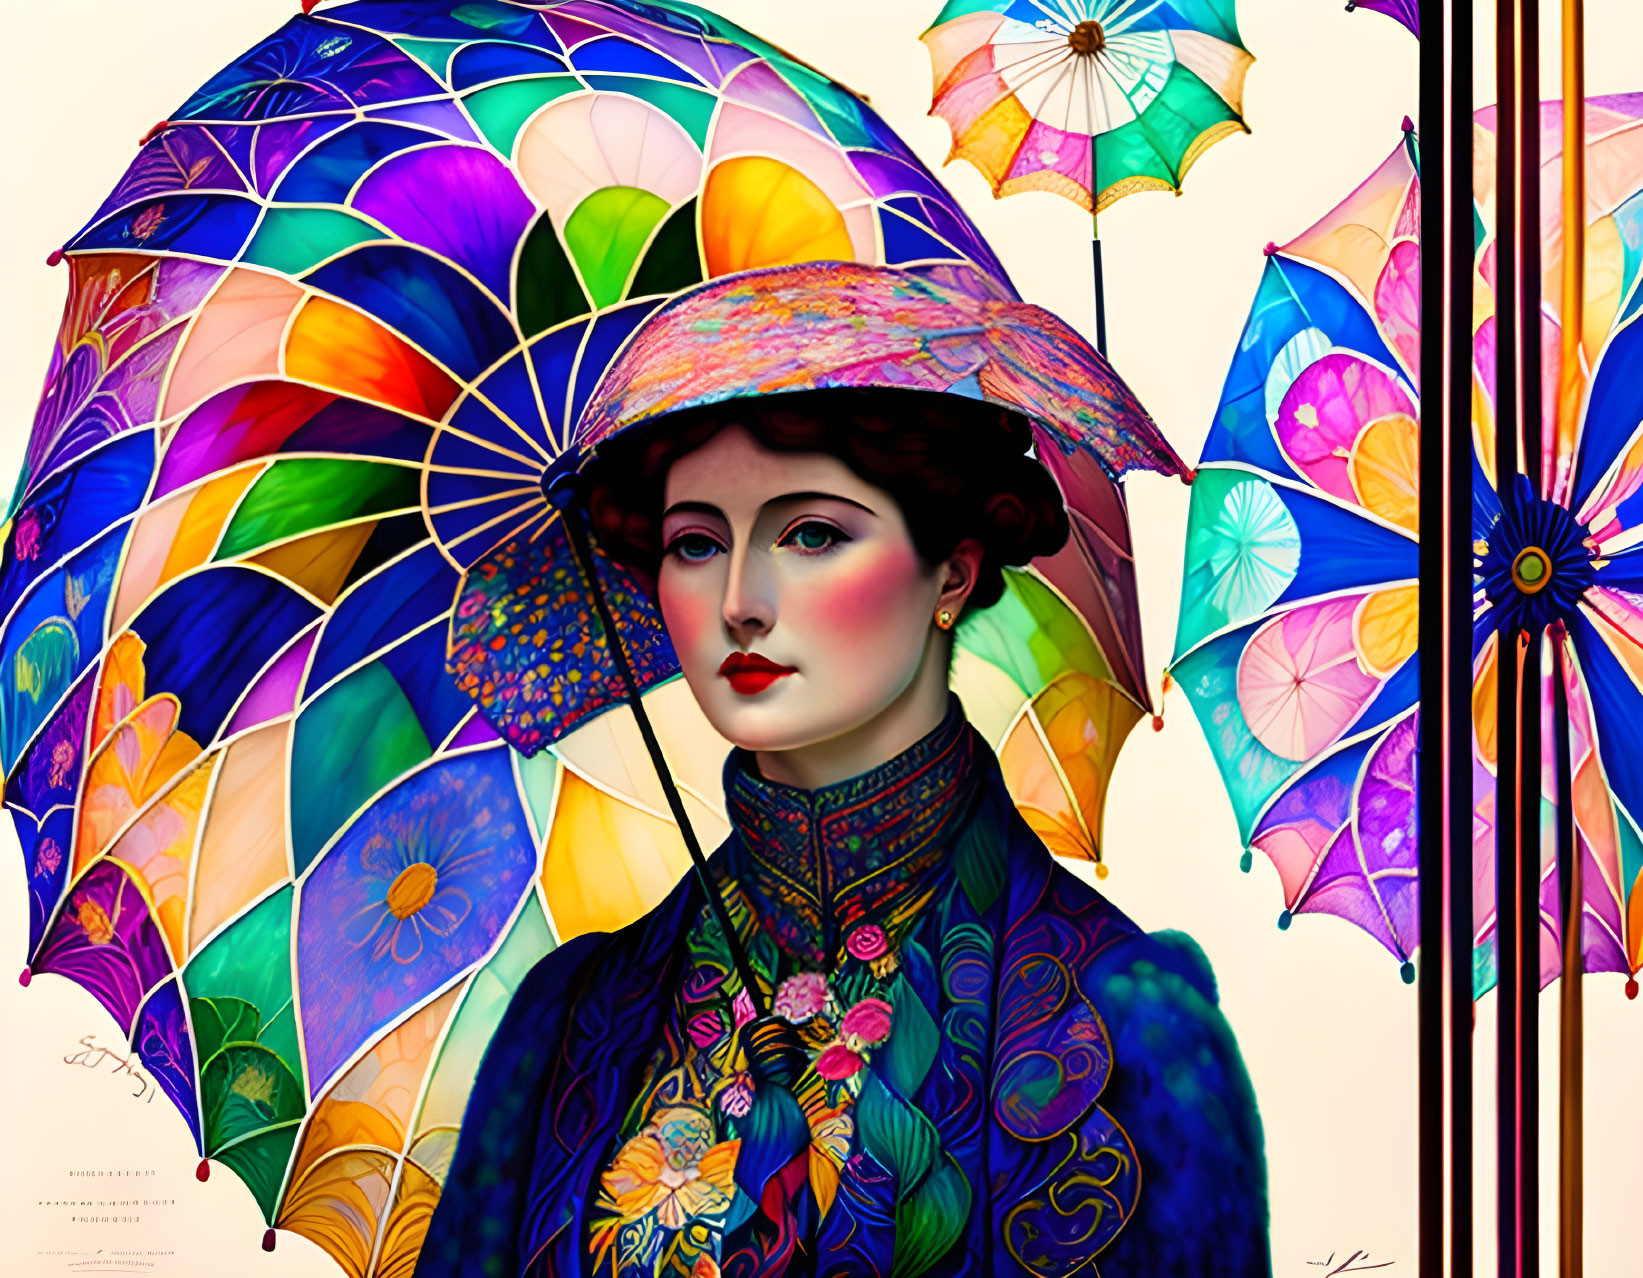 Colorful mosaic umbrella held by woman with porcelain skin among vibrant umbrellas